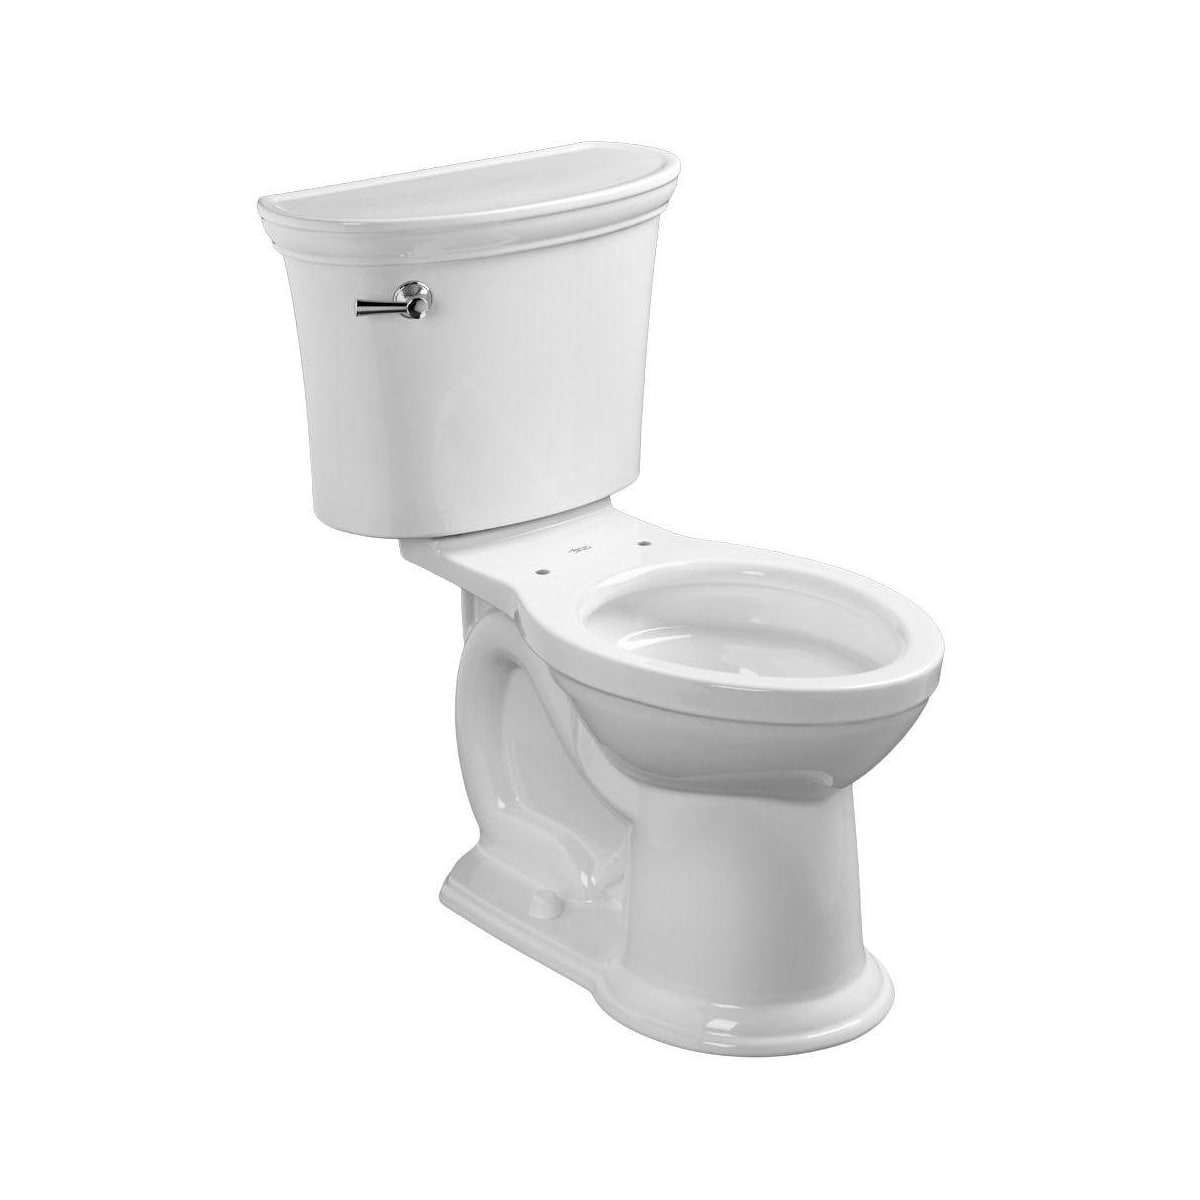 Standard vs. Comfort Toilet Heights: What You Need to Know